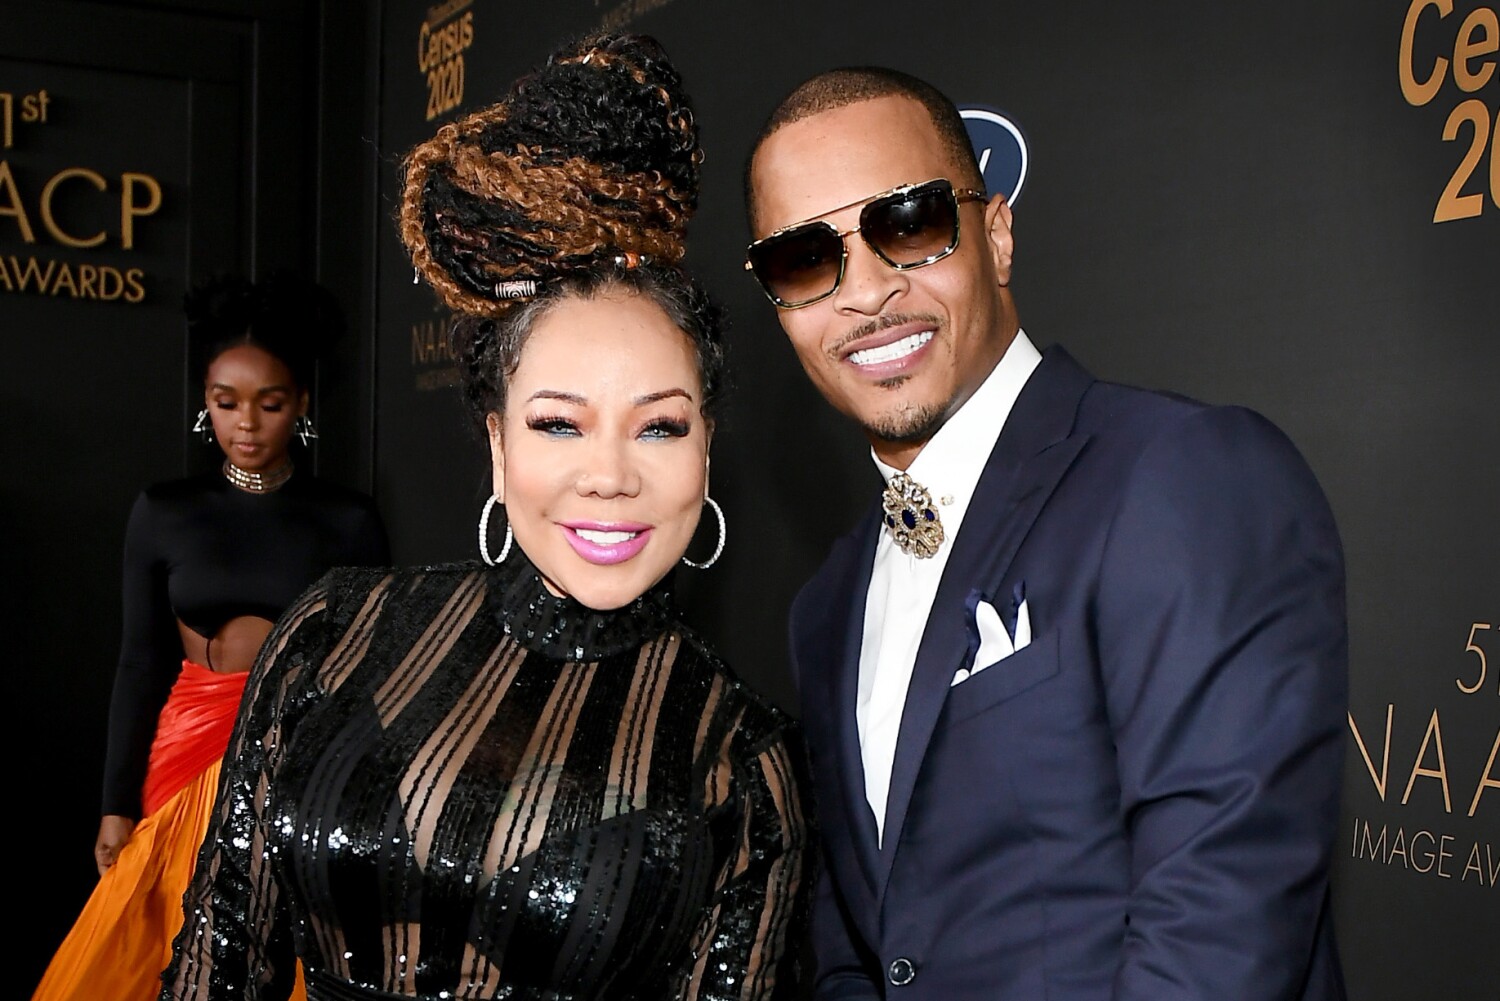 New sex assault claims leveled at T.I. and Tiny, part of wider allegations they deny